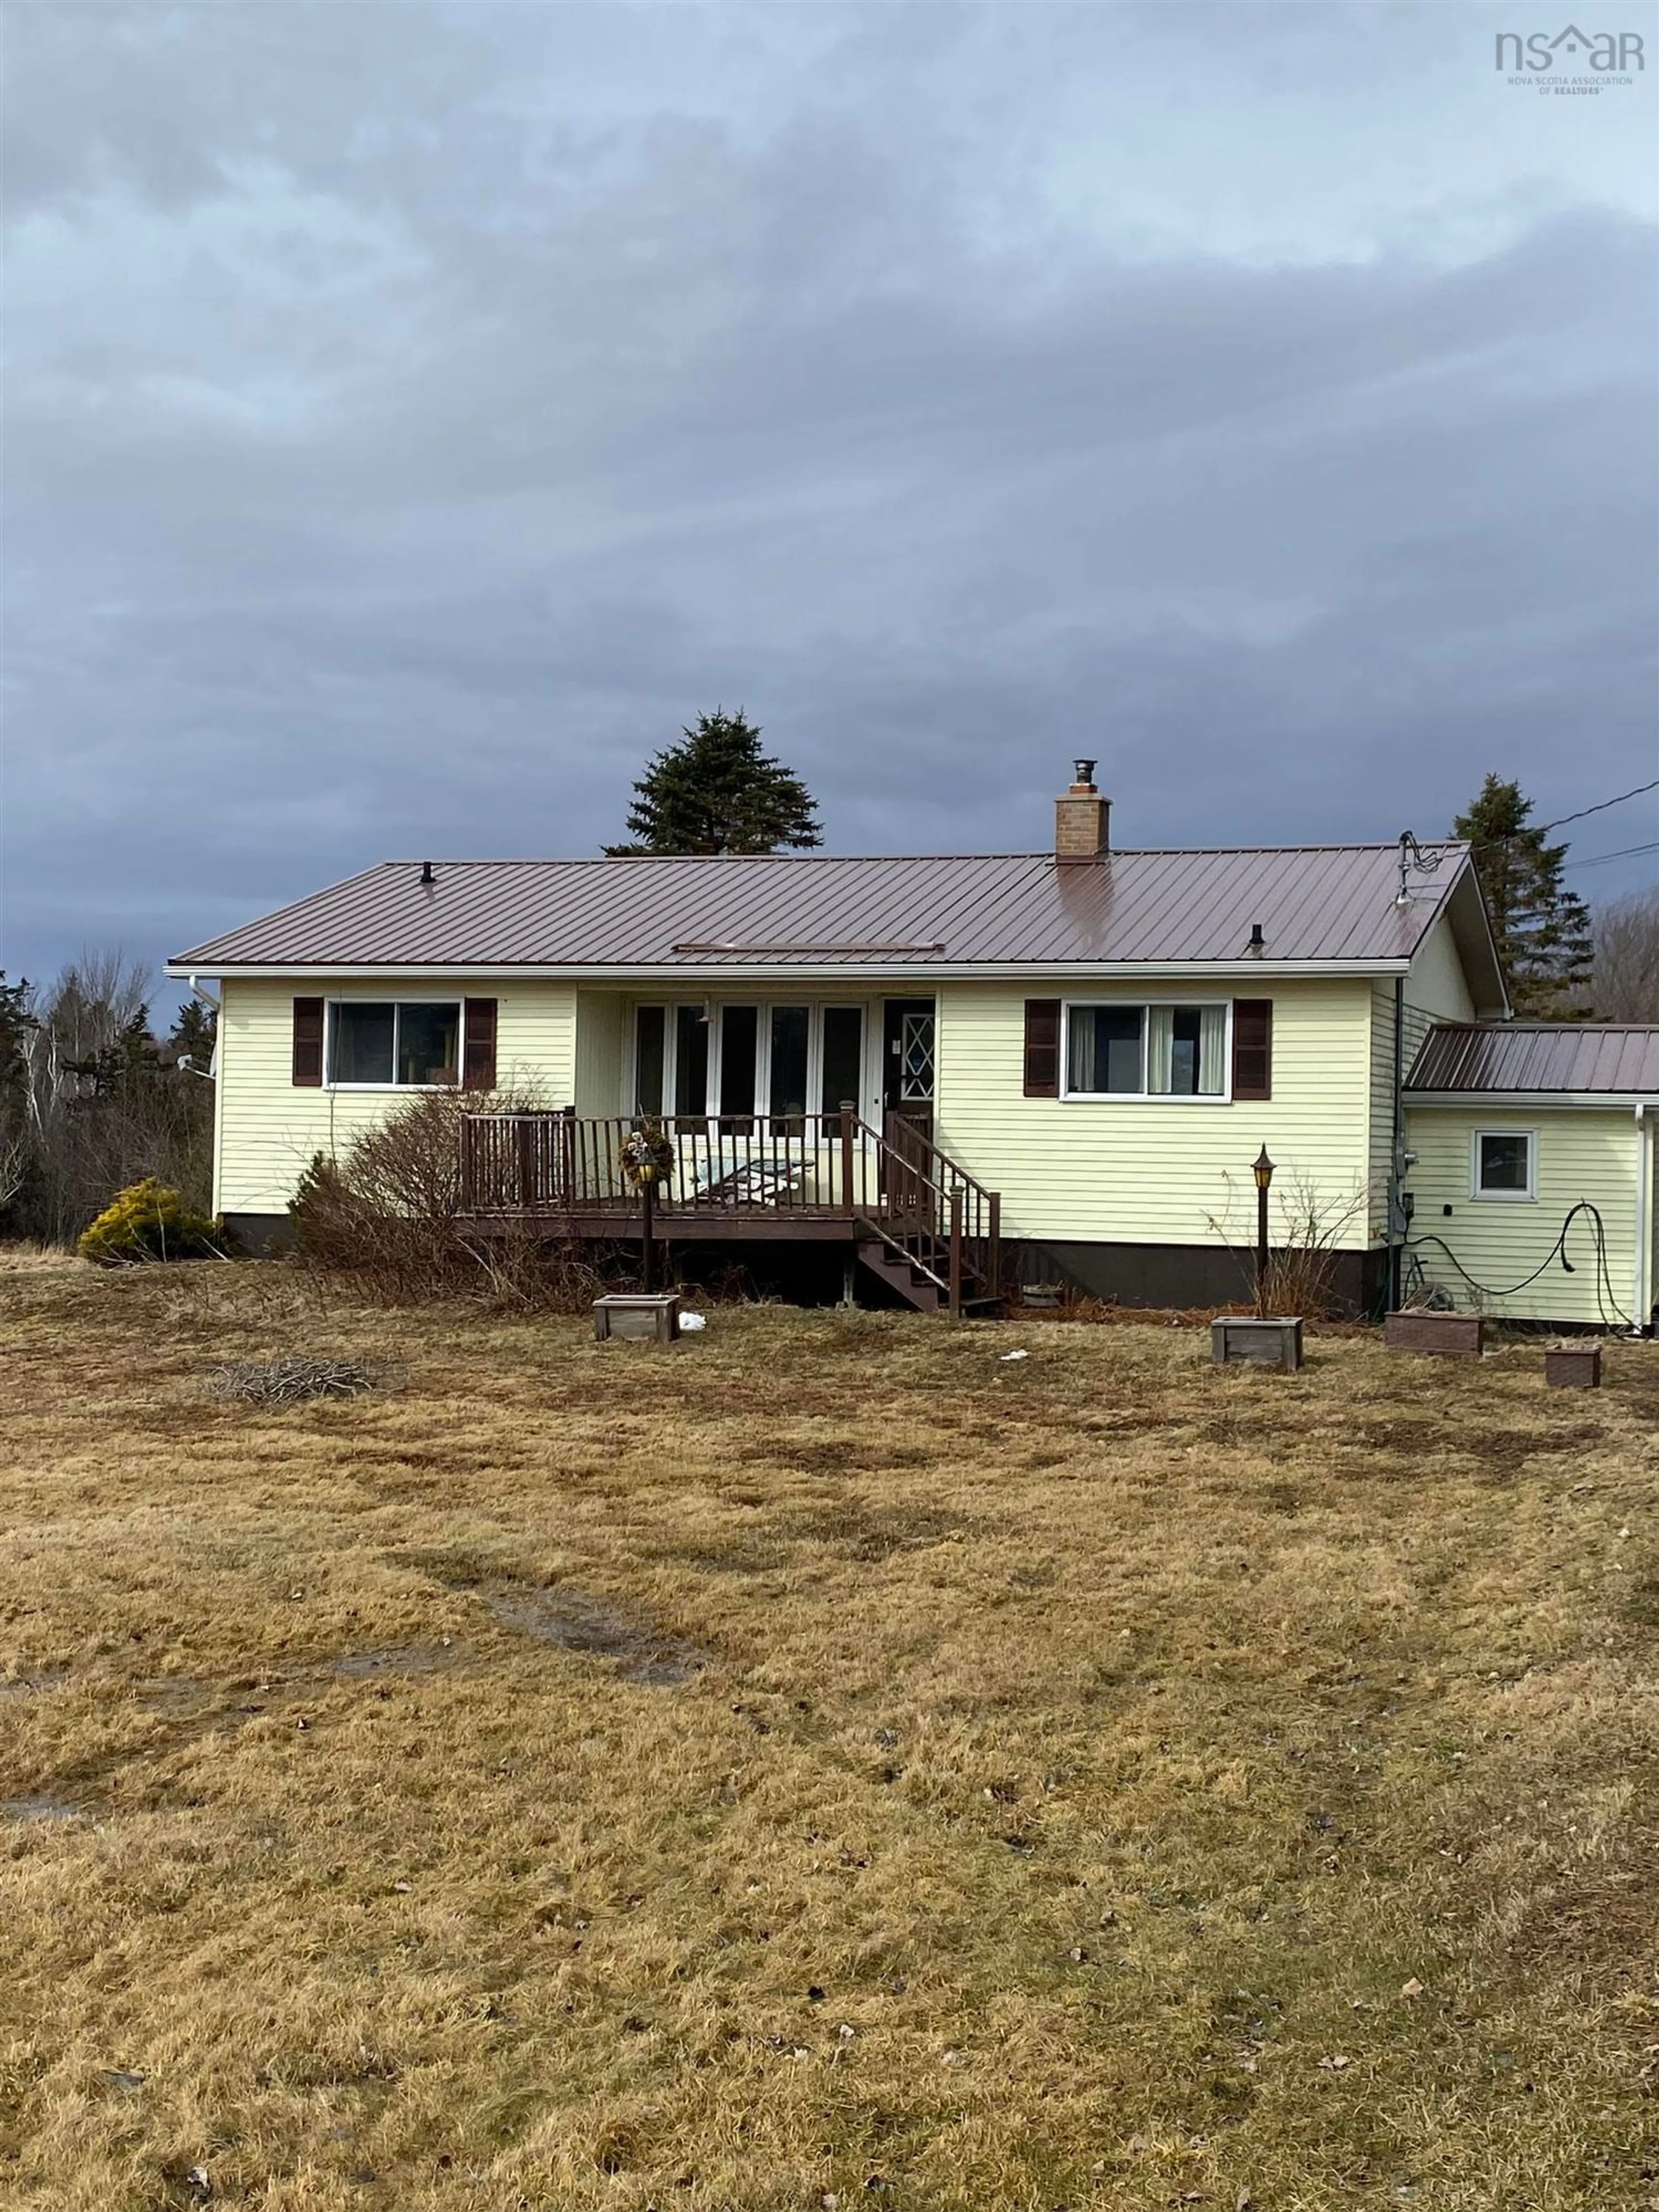 Home with unknown exterior material for 7877 Highway 215, Selma Nova Scotia B0N 1T0